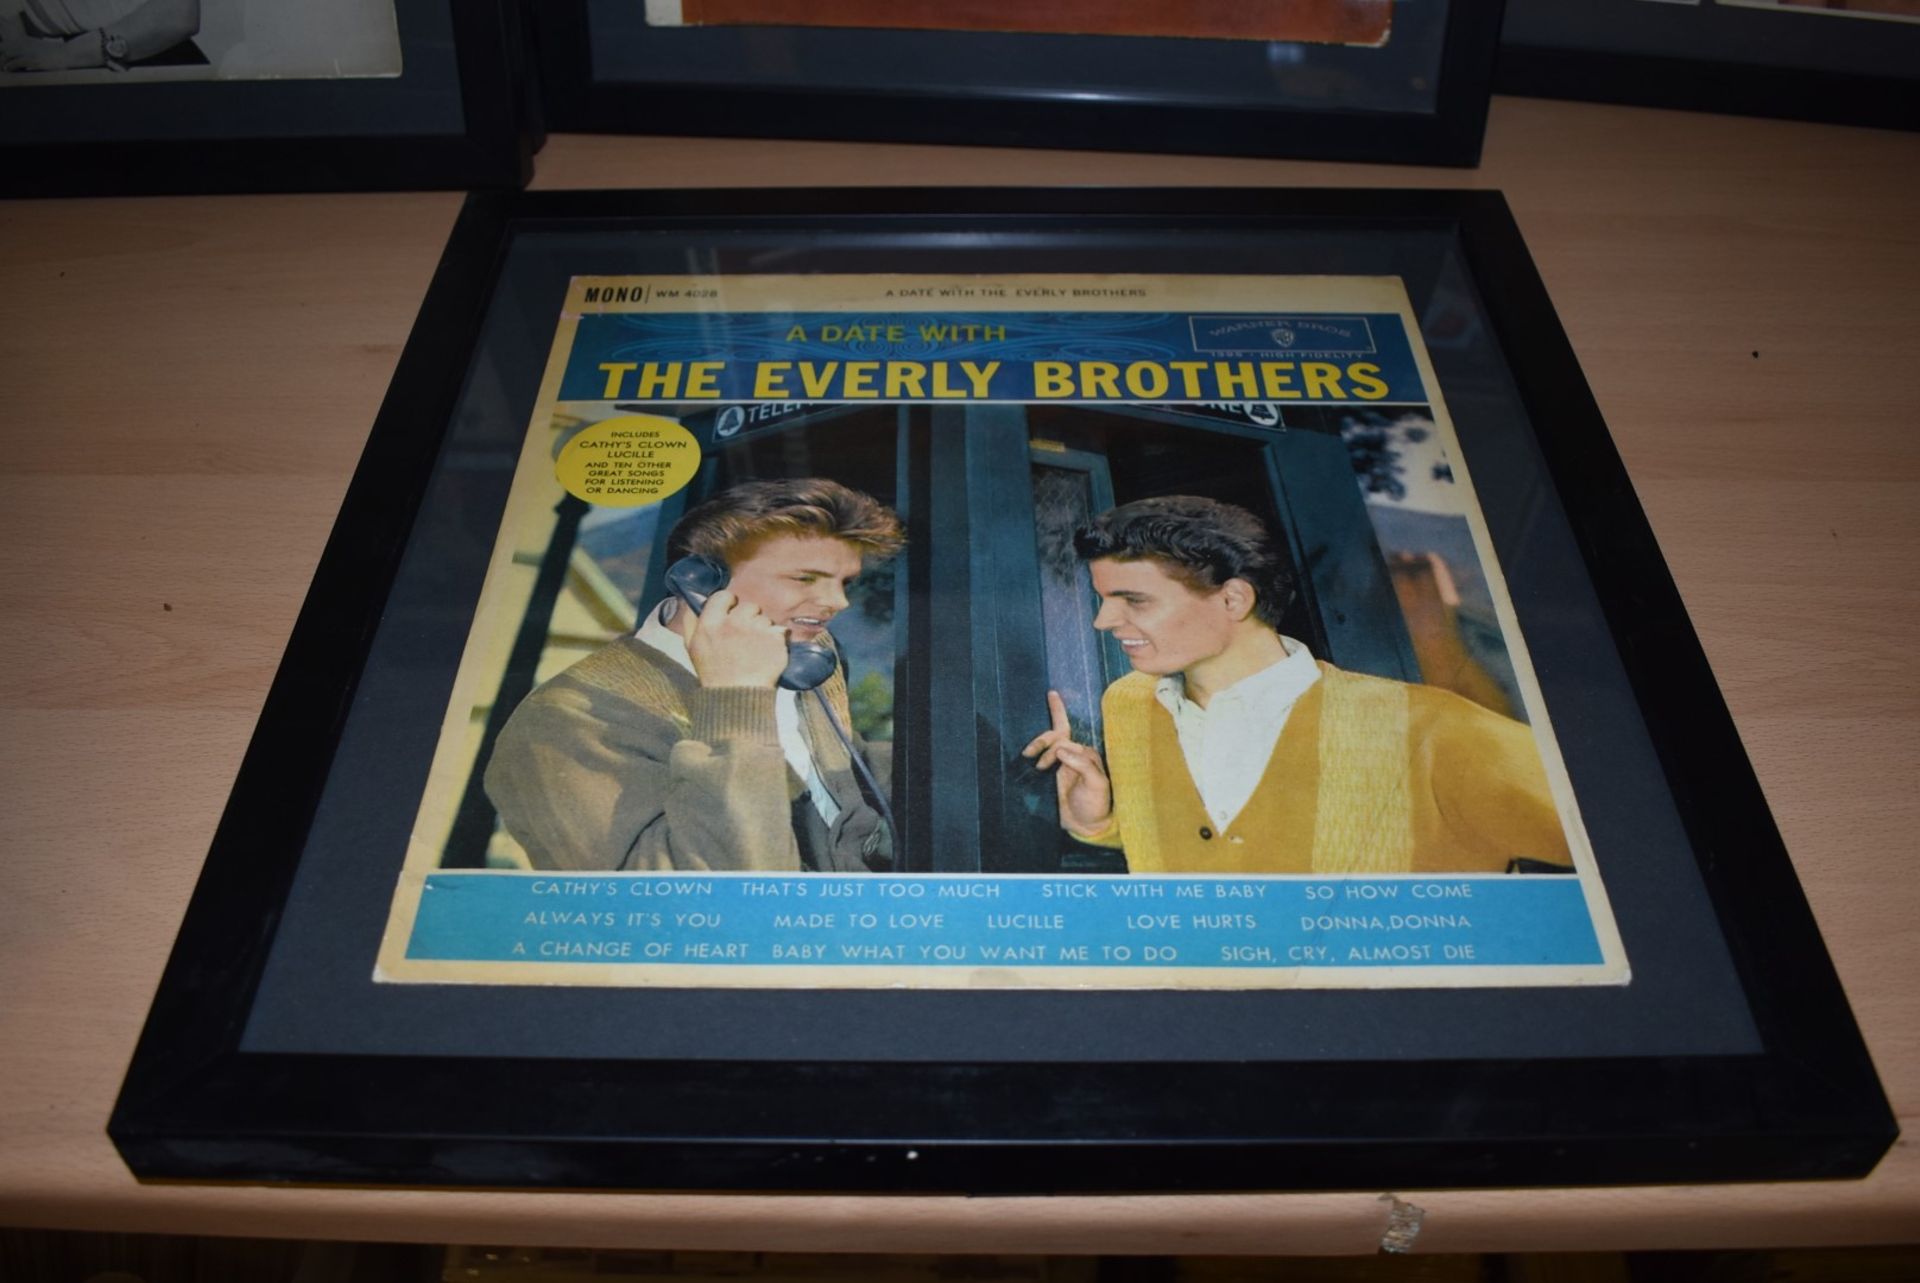 18 x Original Record Sleeves Mounted in 9 x Black Frames - Features Elvis Presley, Connie Francis, - Image 5 of 10